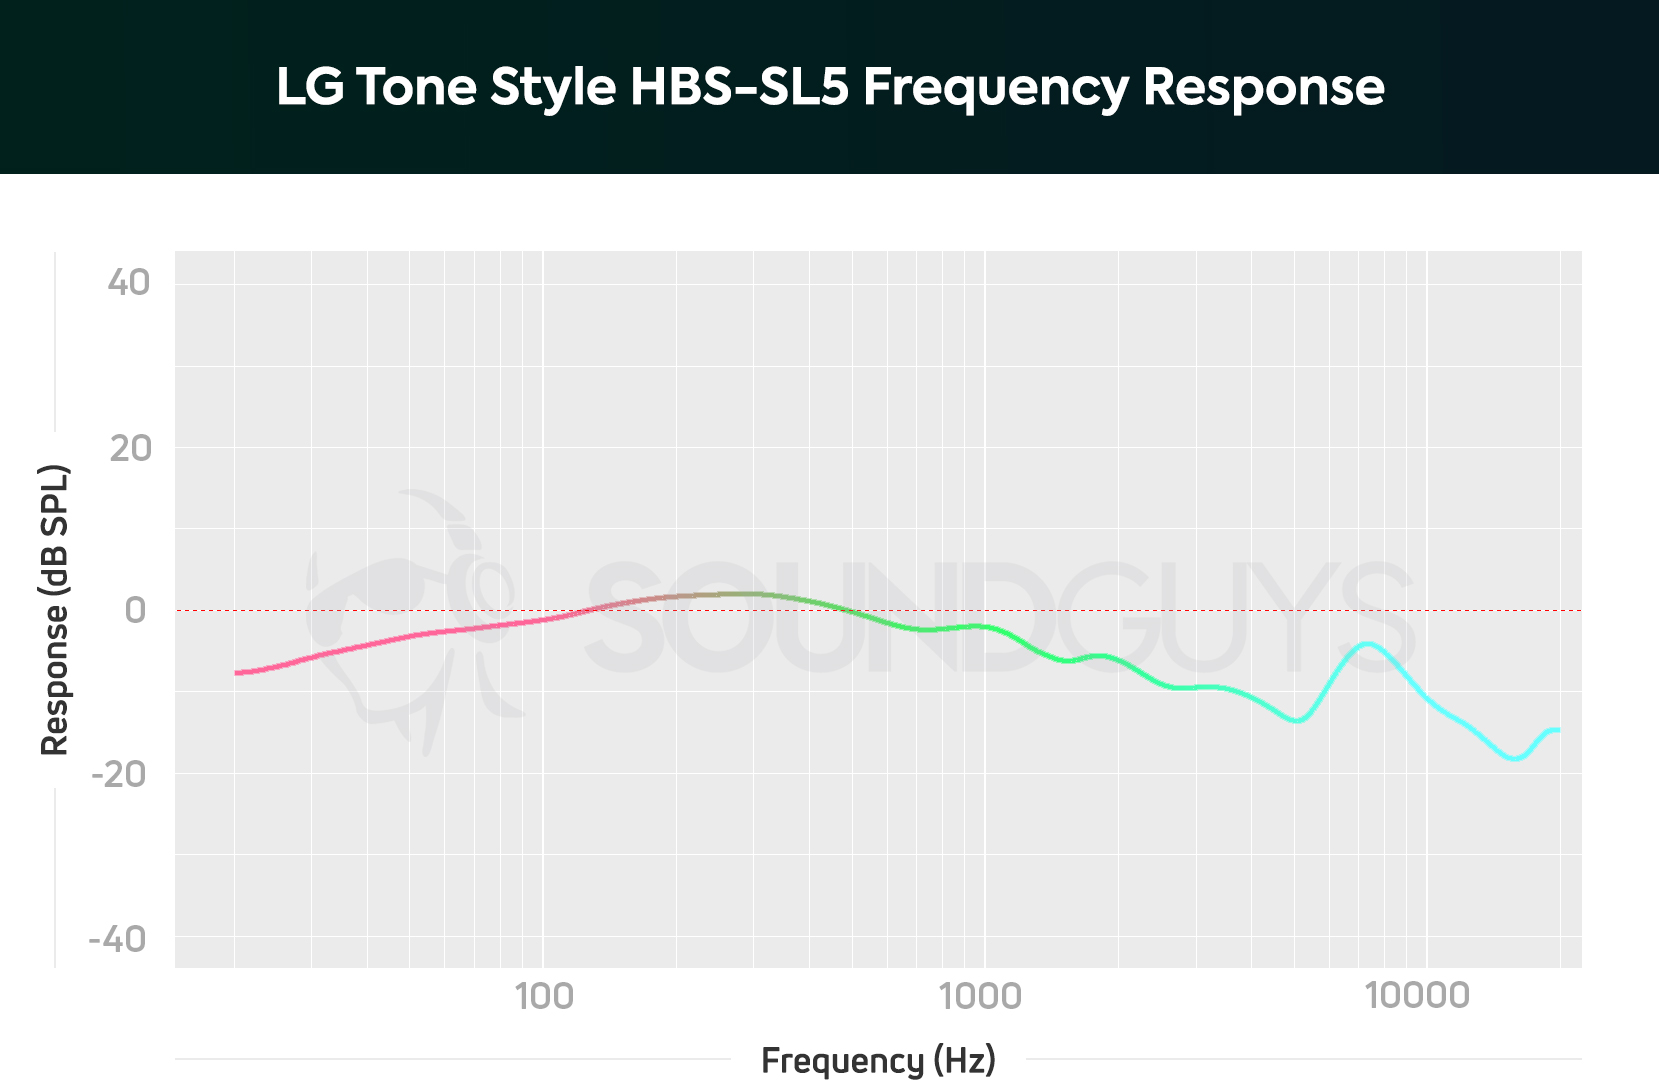 LG Tone Style SL5 frequency response chart.